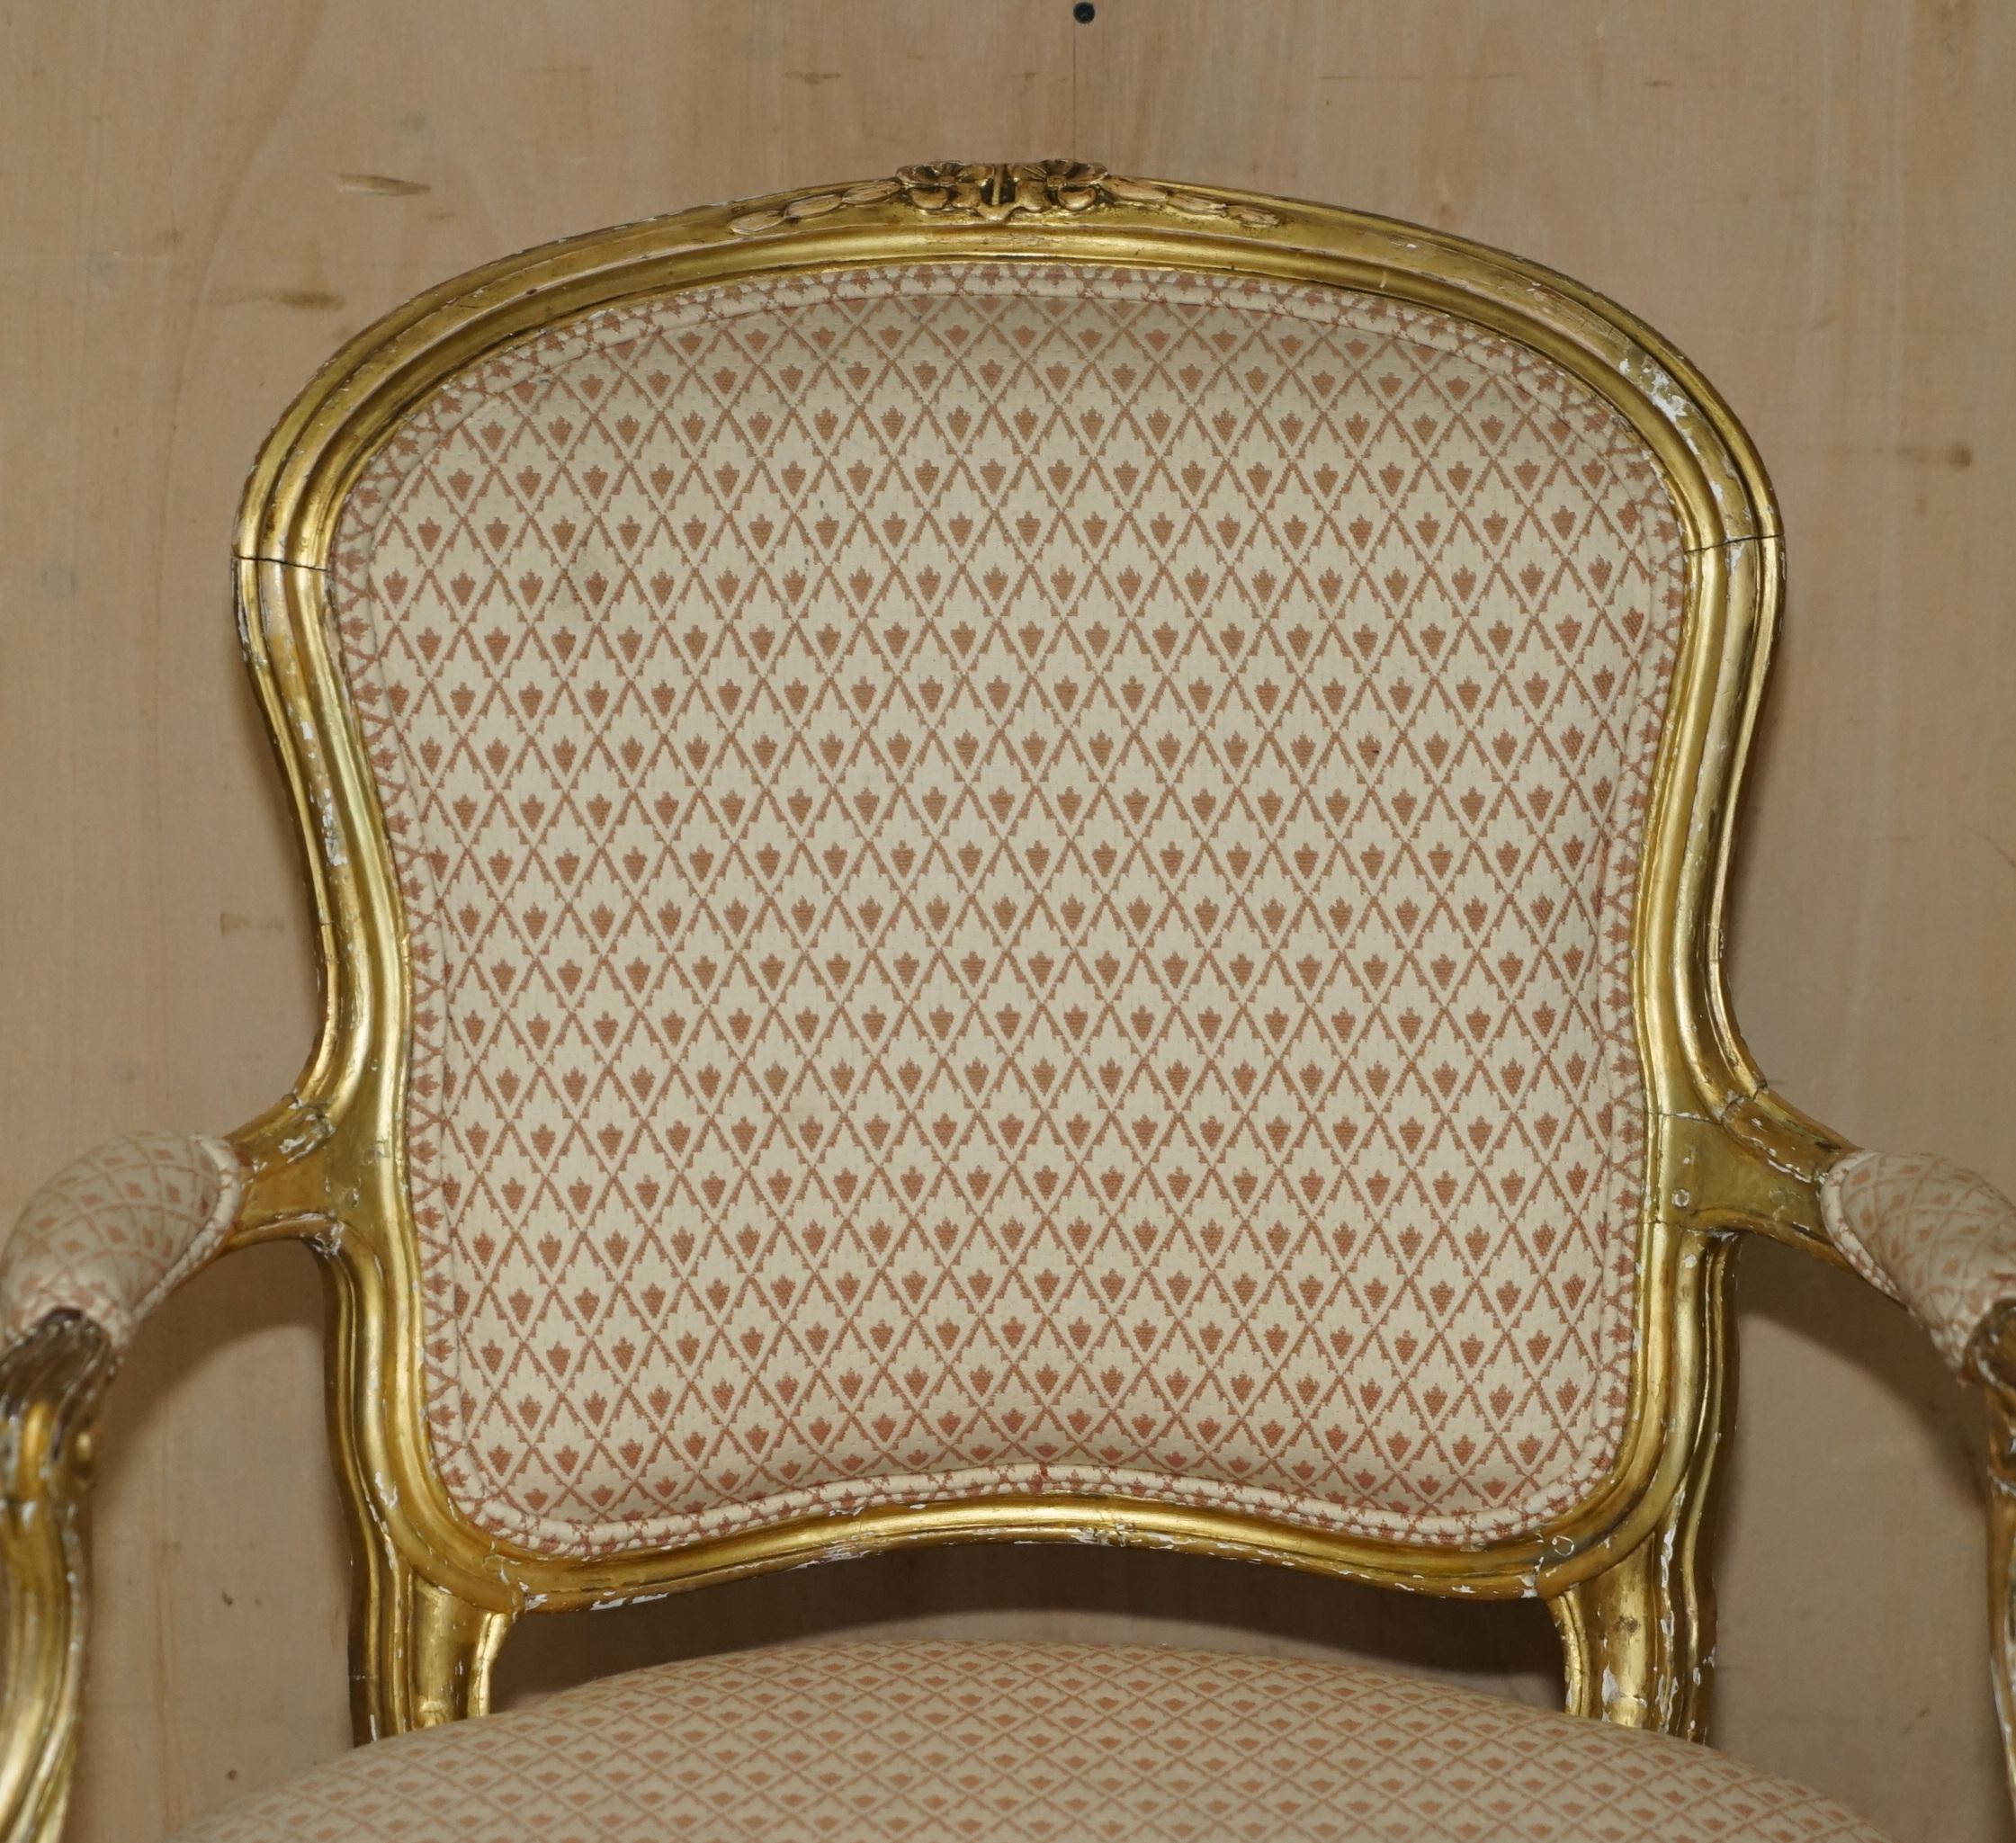 George III FINE GOLD GILTWOOD 18TH CENTURY CLAW & BALL FEET CARVED ANTIQUE BERGERE ARMCHAiR For Sale